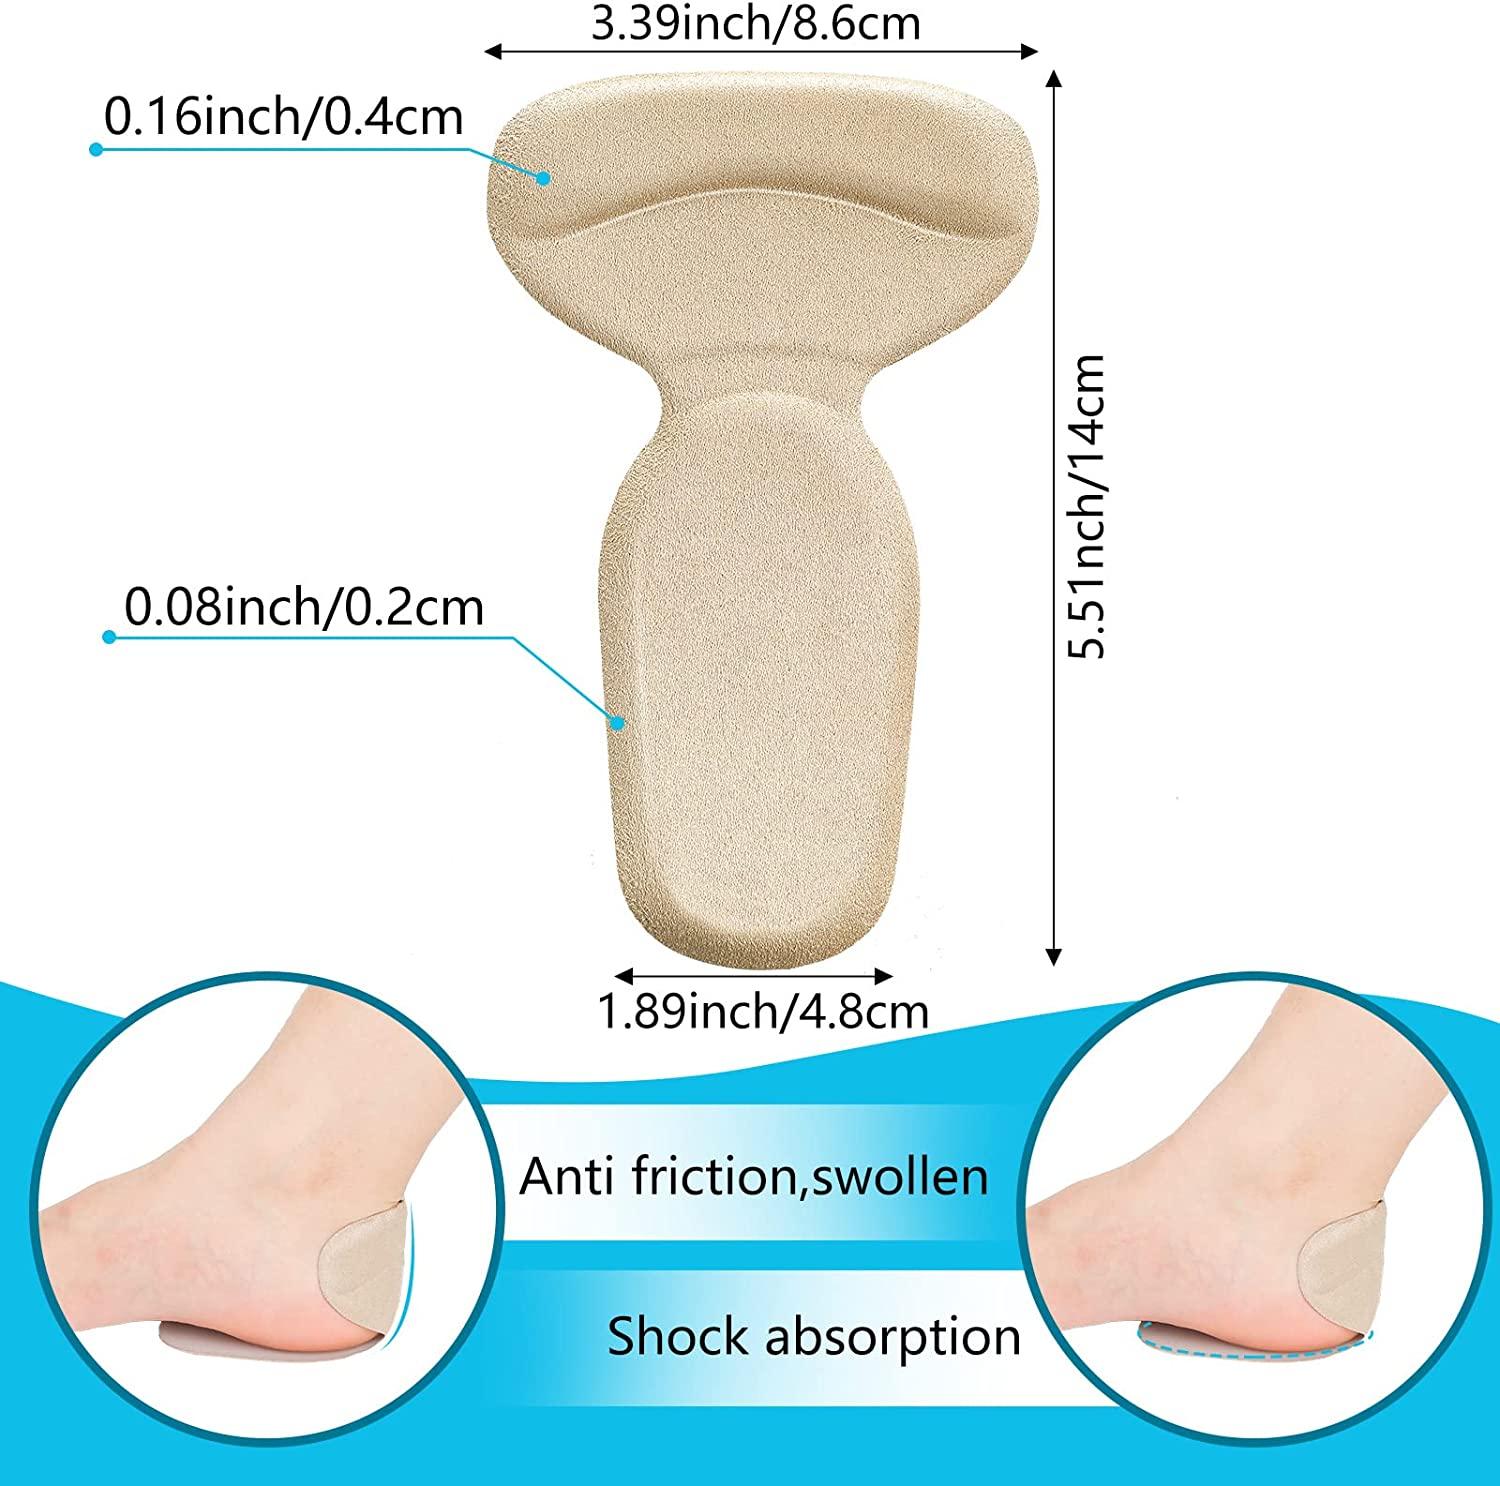 Fancy Feet Back-of-Heel Gel Cushions - One Pair of Cushioned Heels Inserts  to Prevent Rubbing and Blisters from Uncomfortable Shoes - Walmart.com